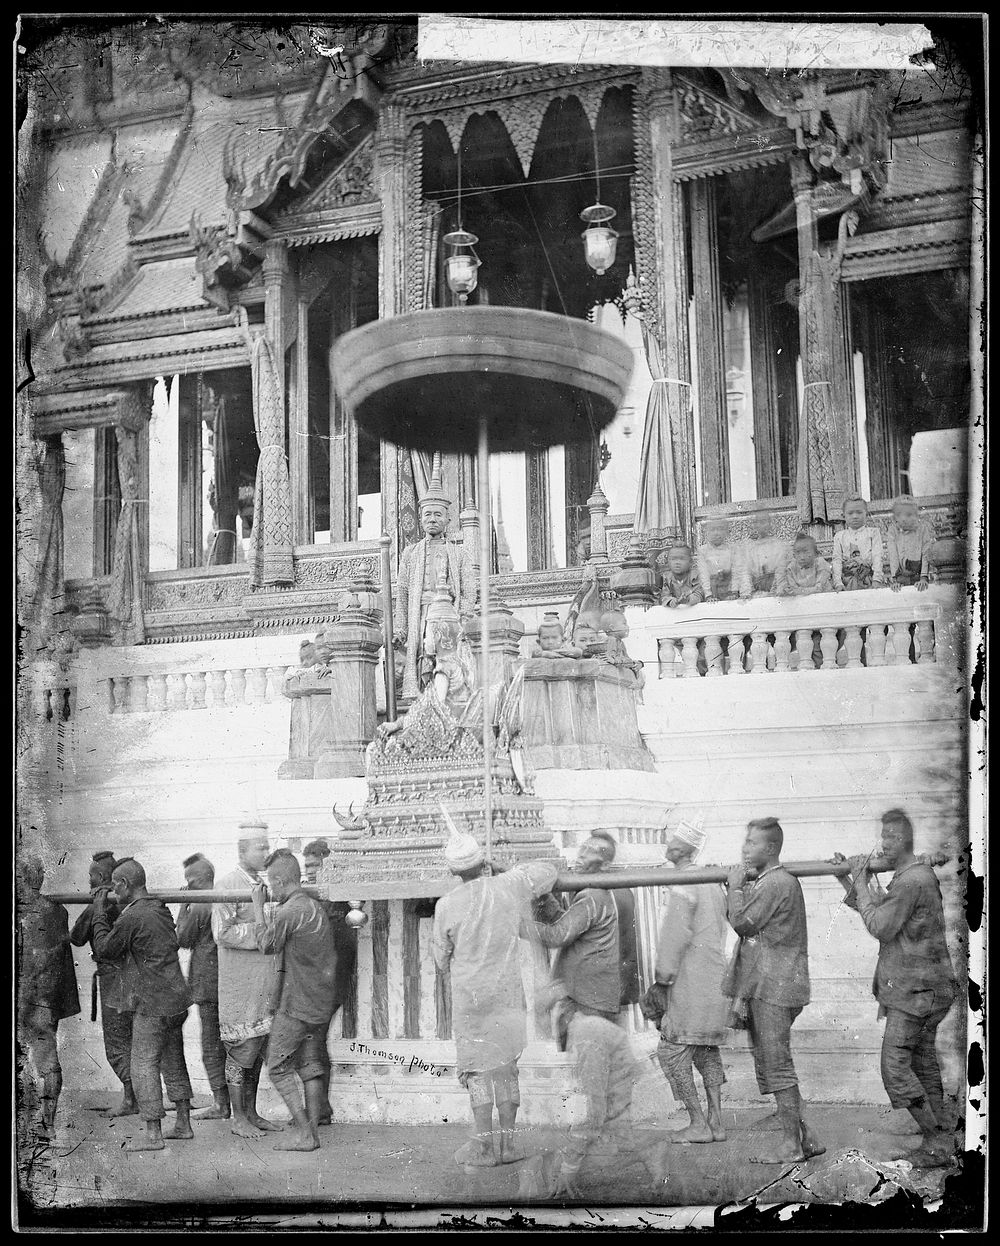 Siam (Thailand): the tonsurate ceremony of Prince Chulalongkorn, day 2. Photograph by John Thomson, 1865.